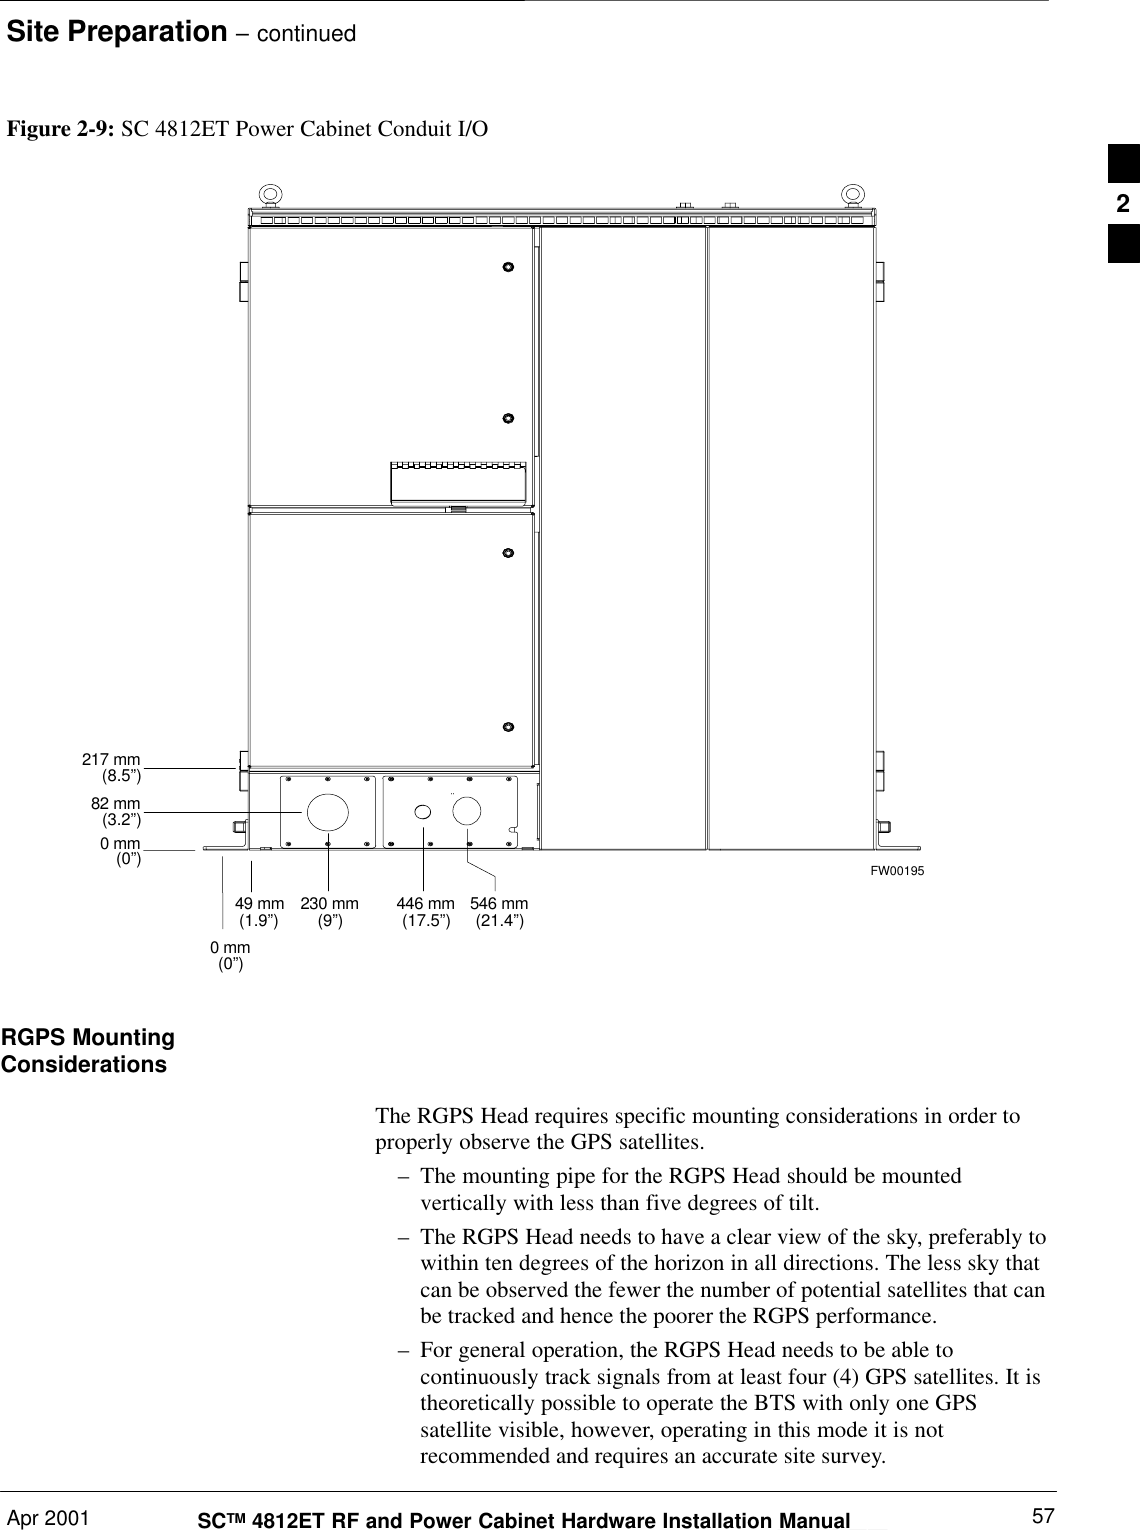 Site Preparation – continuedApr 2001 57SCTM 4812ET RF and Power Cabinet Hardware Installation ManualDRAFT0 mm(0”)0 mm(0”)230 mm(9”)446 mm(17.5”)546 mm(21.4”)82 mm(3.2”)Figure 2-9: SC 4812ET Power Cabinet Conduit I/O49 mm(1.9”)217 mm(8.5”)FW00195RGPS MountingConsiderationsThe RGPS Head requires specific mounting considerations in order toproperly observe the GPS satellites.–The mounting pipe for the RGPS Head should be mountedvertically with less than five degrees of tilt.–The RGPS Head needs to have a clear view of the sky, preferably towithin ten degrees of the horizon in all directions. The less sky thatcan be observed the fewer the number of potential satellites that canbe tracked and hence the poorer the RGPS performance.–For general operation, the RGPS Head needs to be able tocontinuously track signals from at least four (4) GPS satellites. It istheoretically possible to operate the BTS with only one GPSsatellite visible, however, operating in this mode it is notrecommended and requires an accurate site survey.2